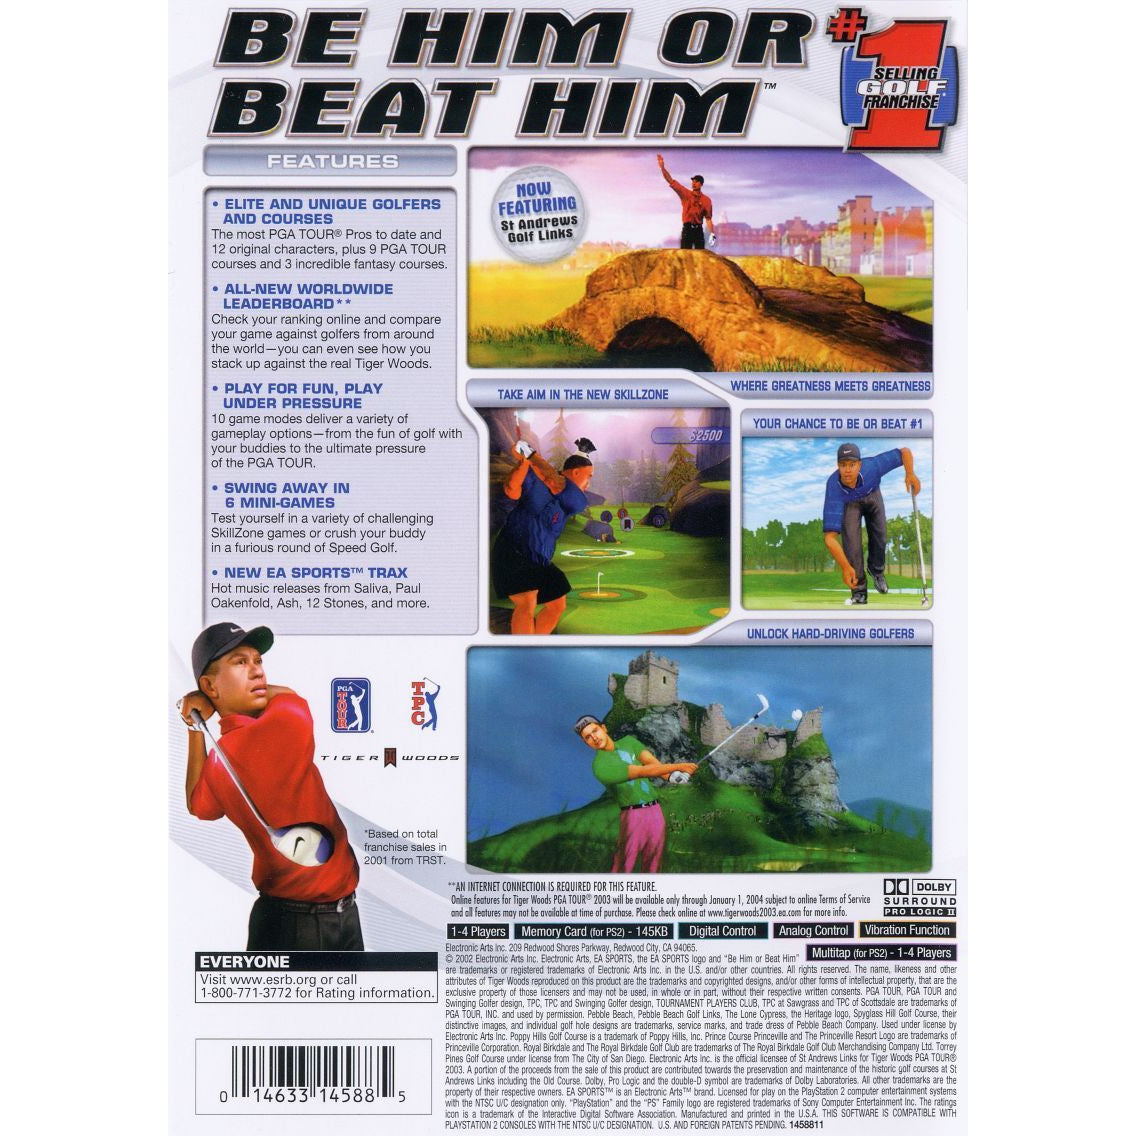 Tiger Woods PGA Tour 2003 - PlayStation 2 (PS2) Game Complete - YourGamingShop.com - Buy, Sell, Trade Video Games Online. 120 Day Warranty. Satisfaction Guaranteed.